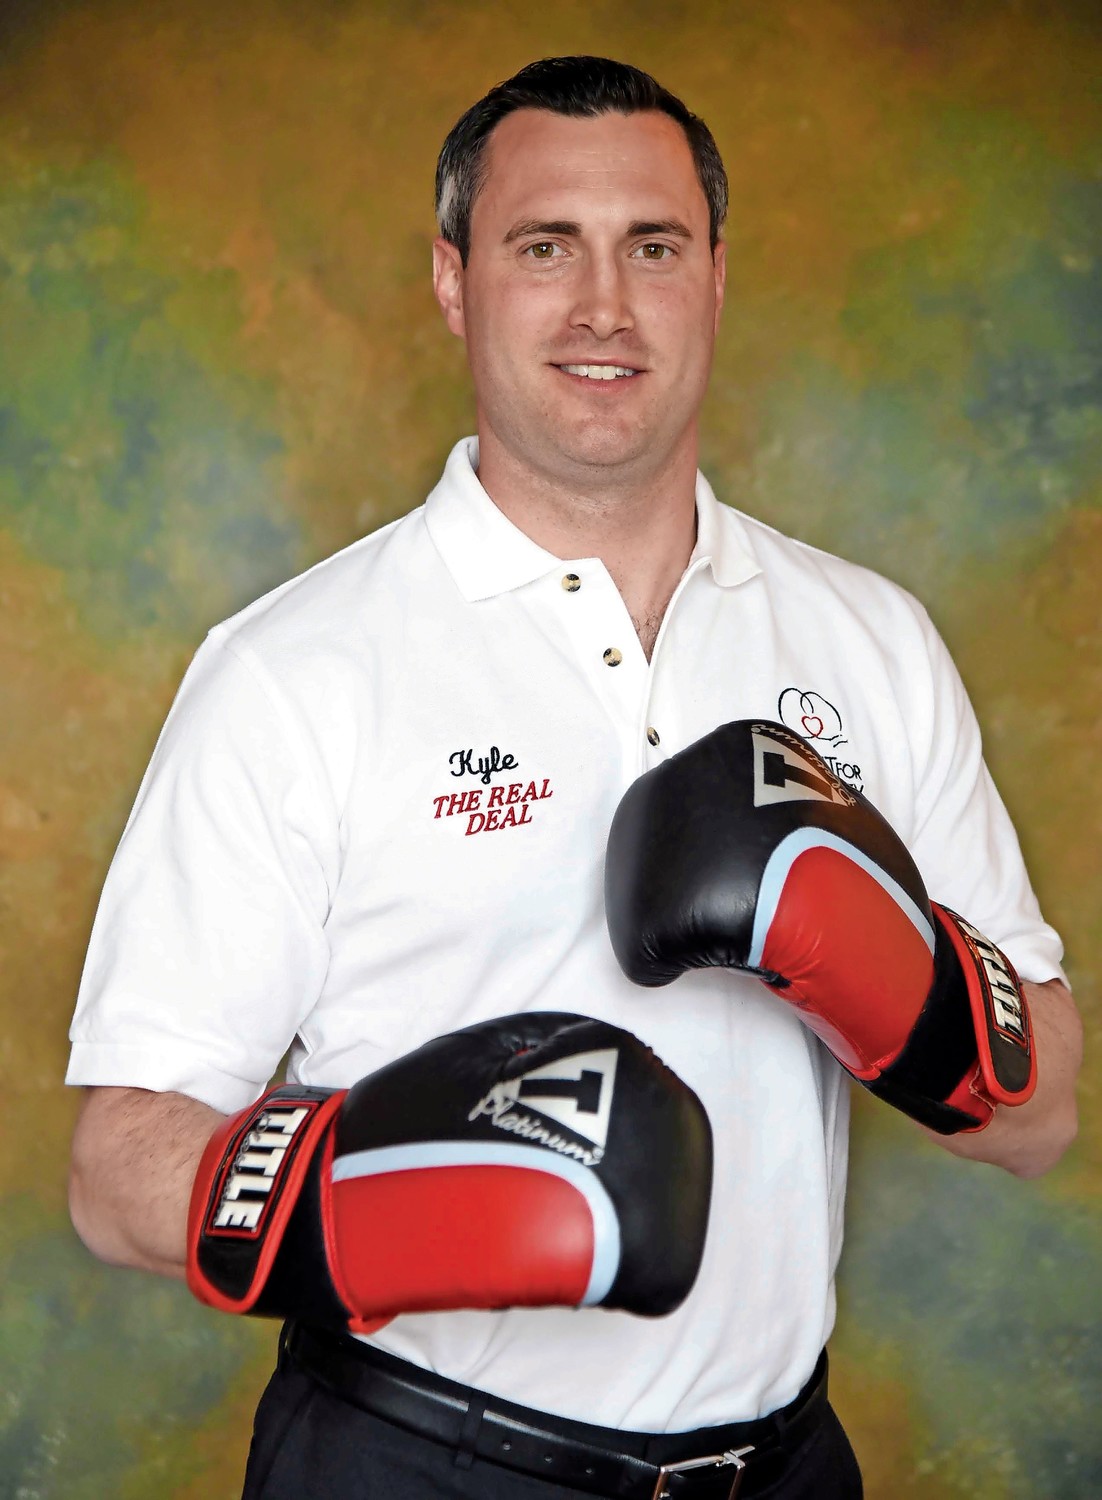 Kyle Burkhardt, of Seaford, will box in the 14th annual Long Island Fight for Charity Main Event on Nov. 20.